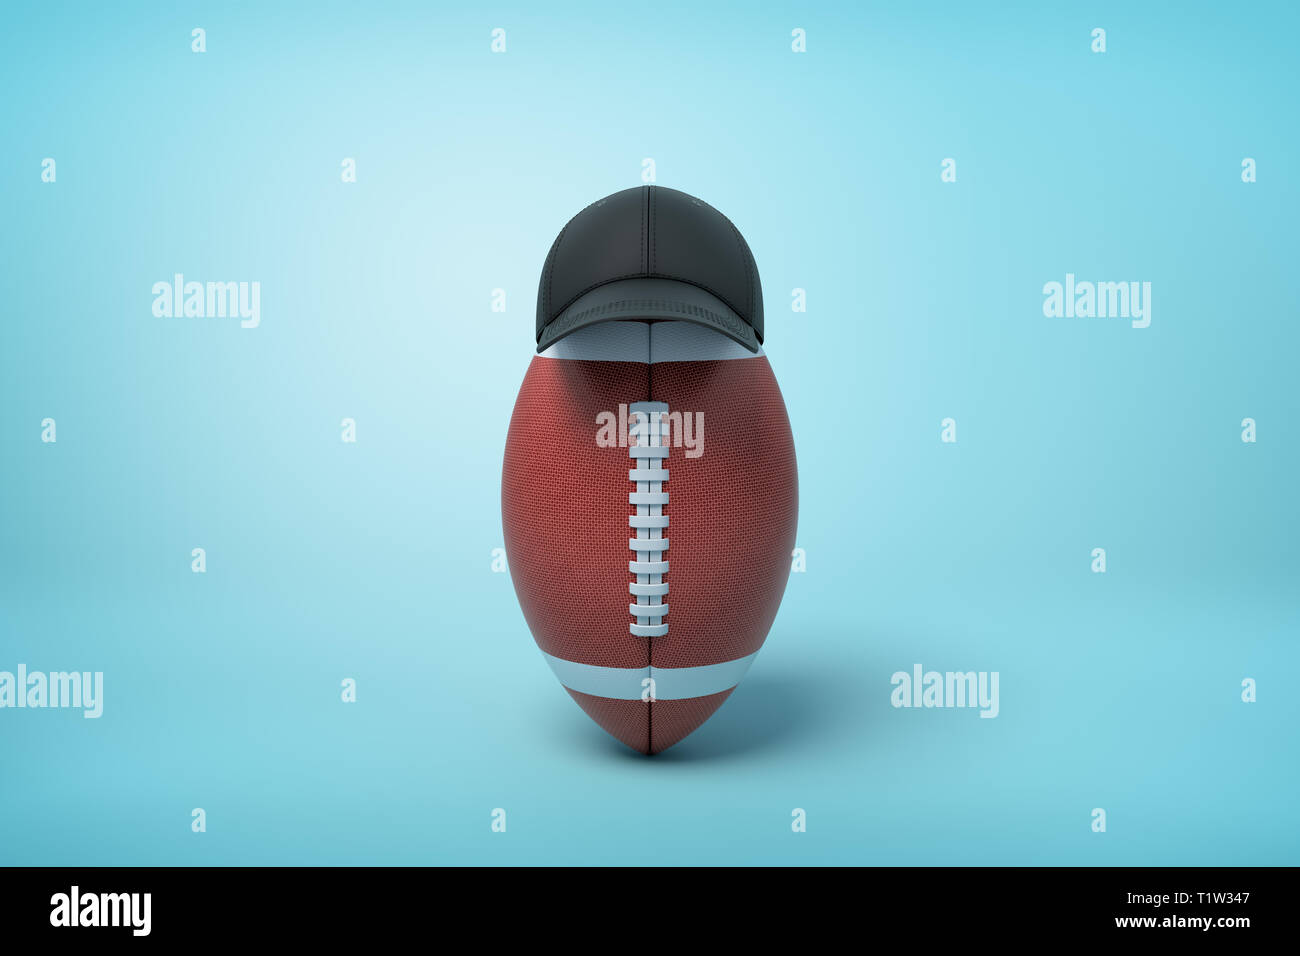 3d rendering of oval ball for American football standing upright on the right wearing black cap on light blue background. Stock Photo